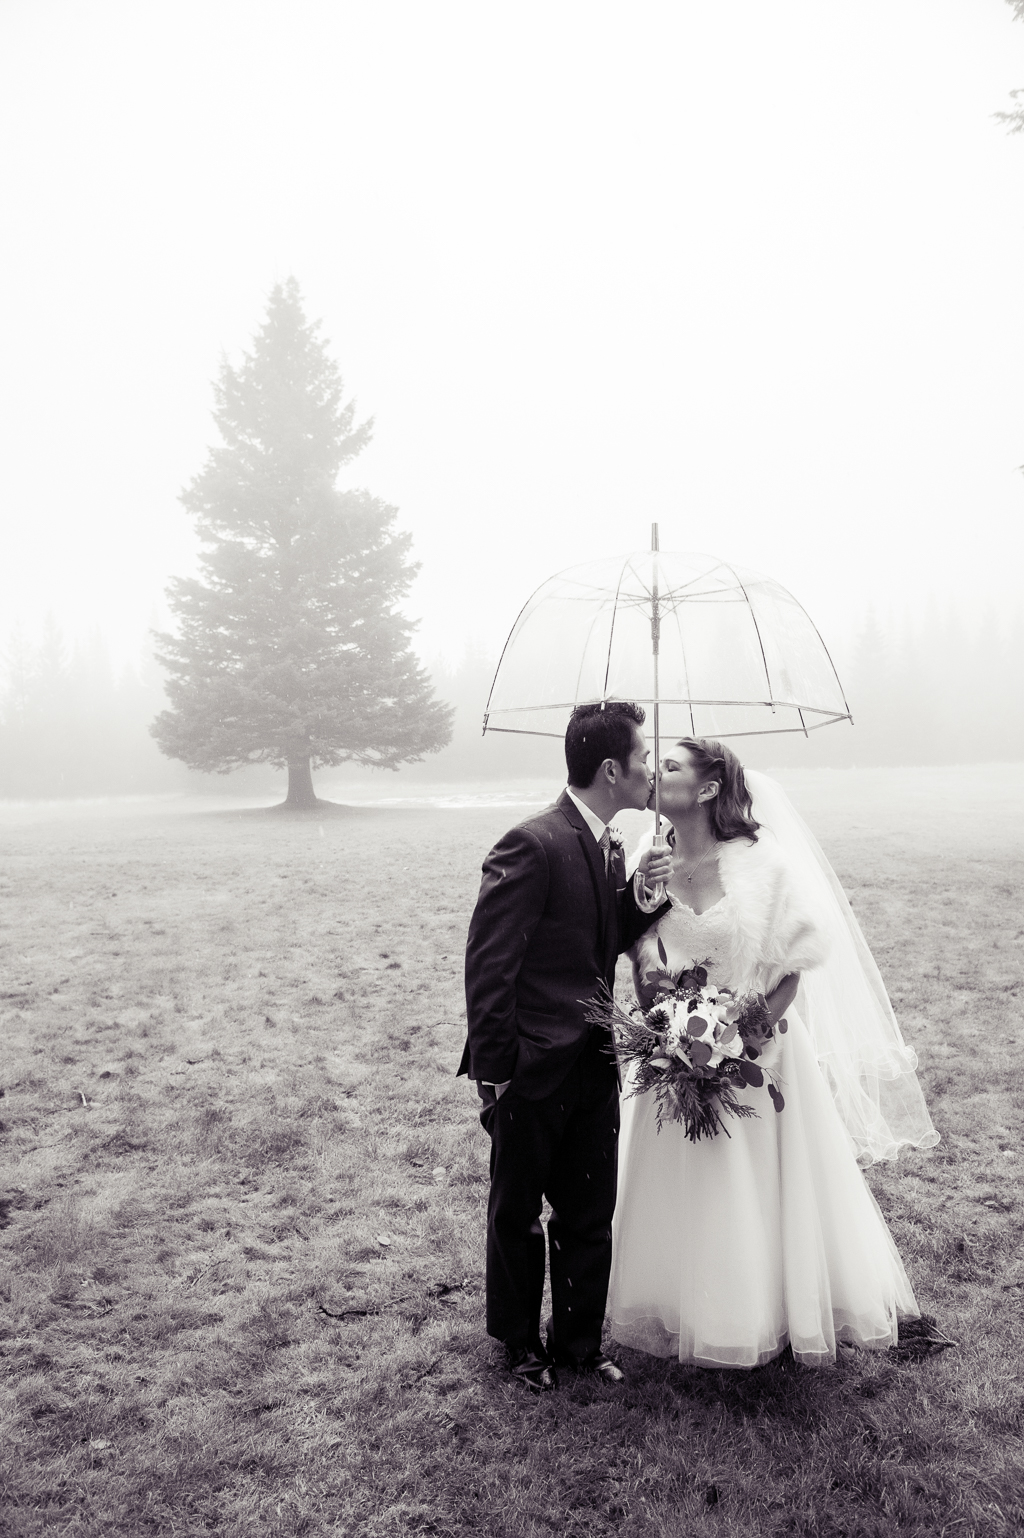 bride and groom kiss under a clear umbrella in a foggy field with a giant tree in the background